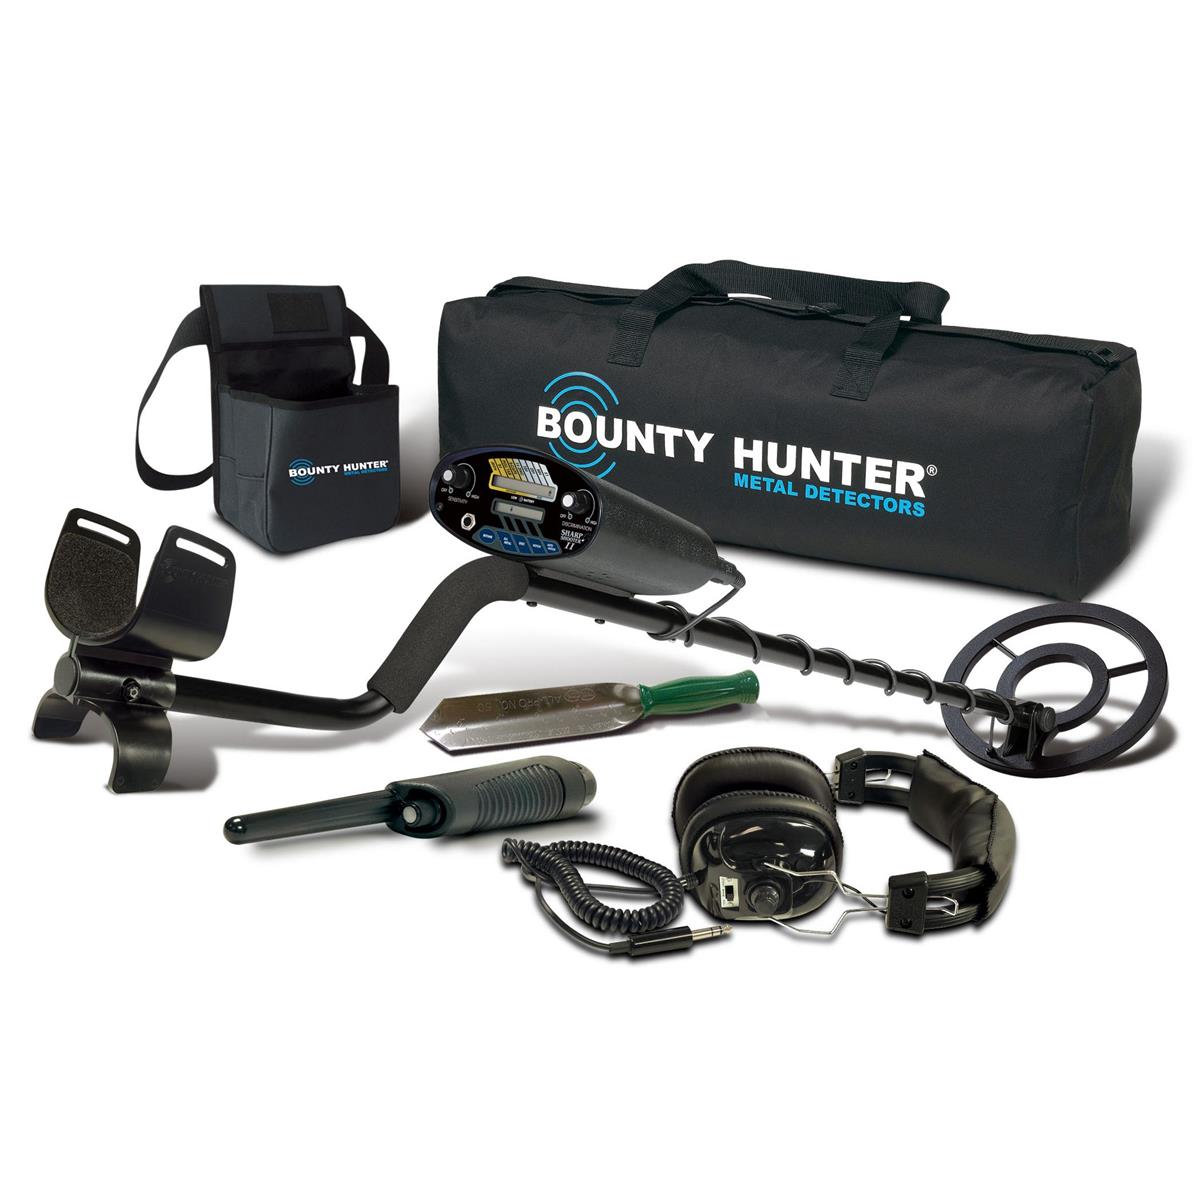 Image of Bounty Hunter Sharp Shooter II Metal Detector with Complete Pro Kit